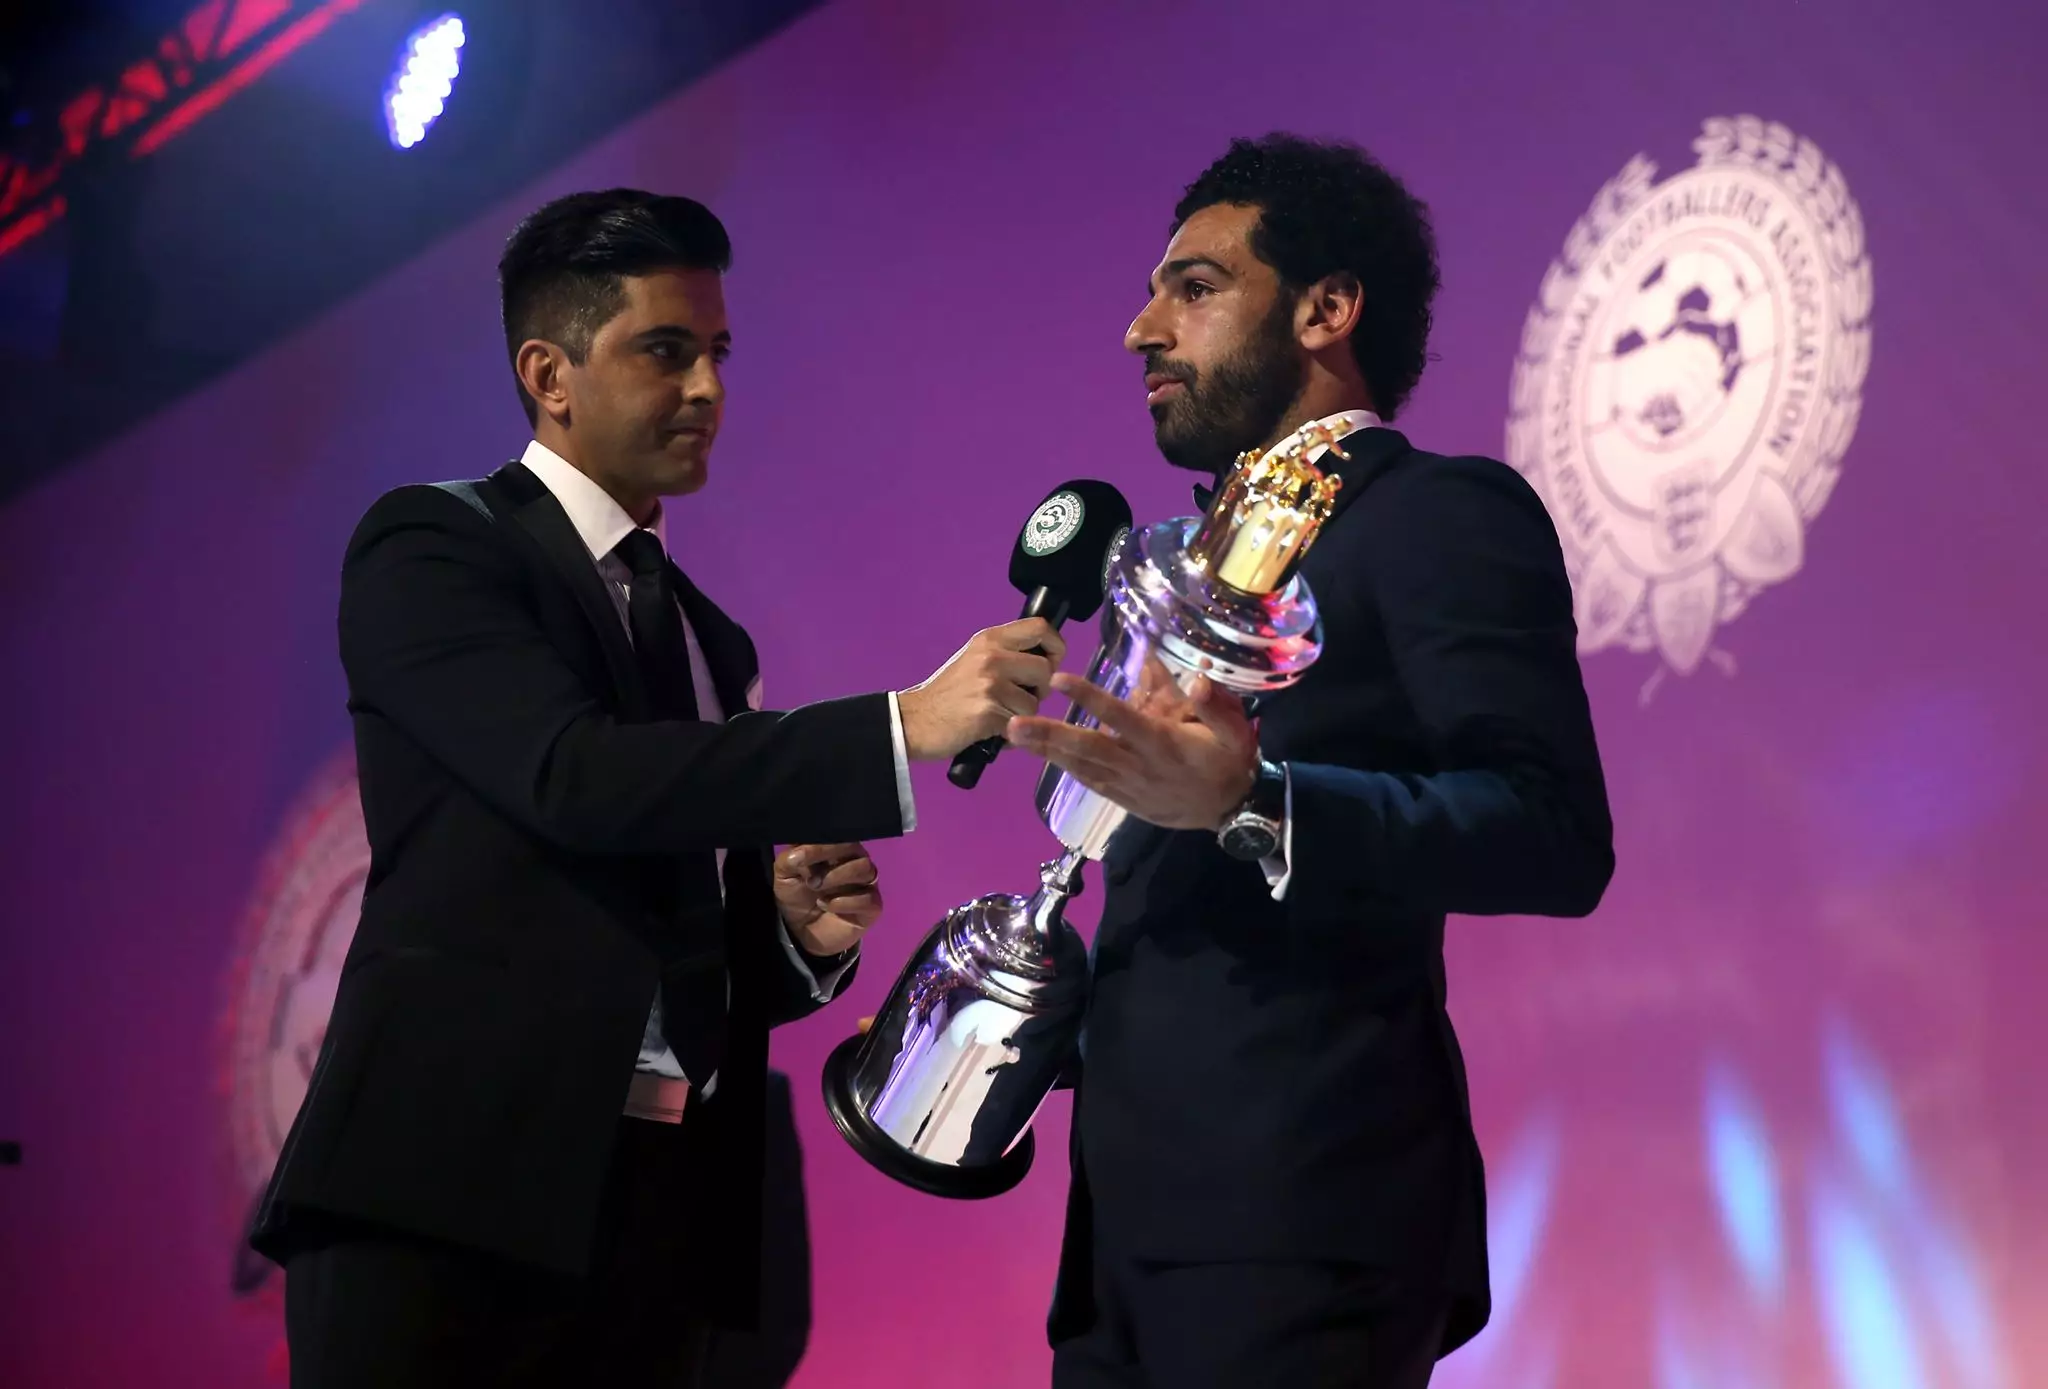 Salah presented with the PFA Player of the Year award. Image: PA